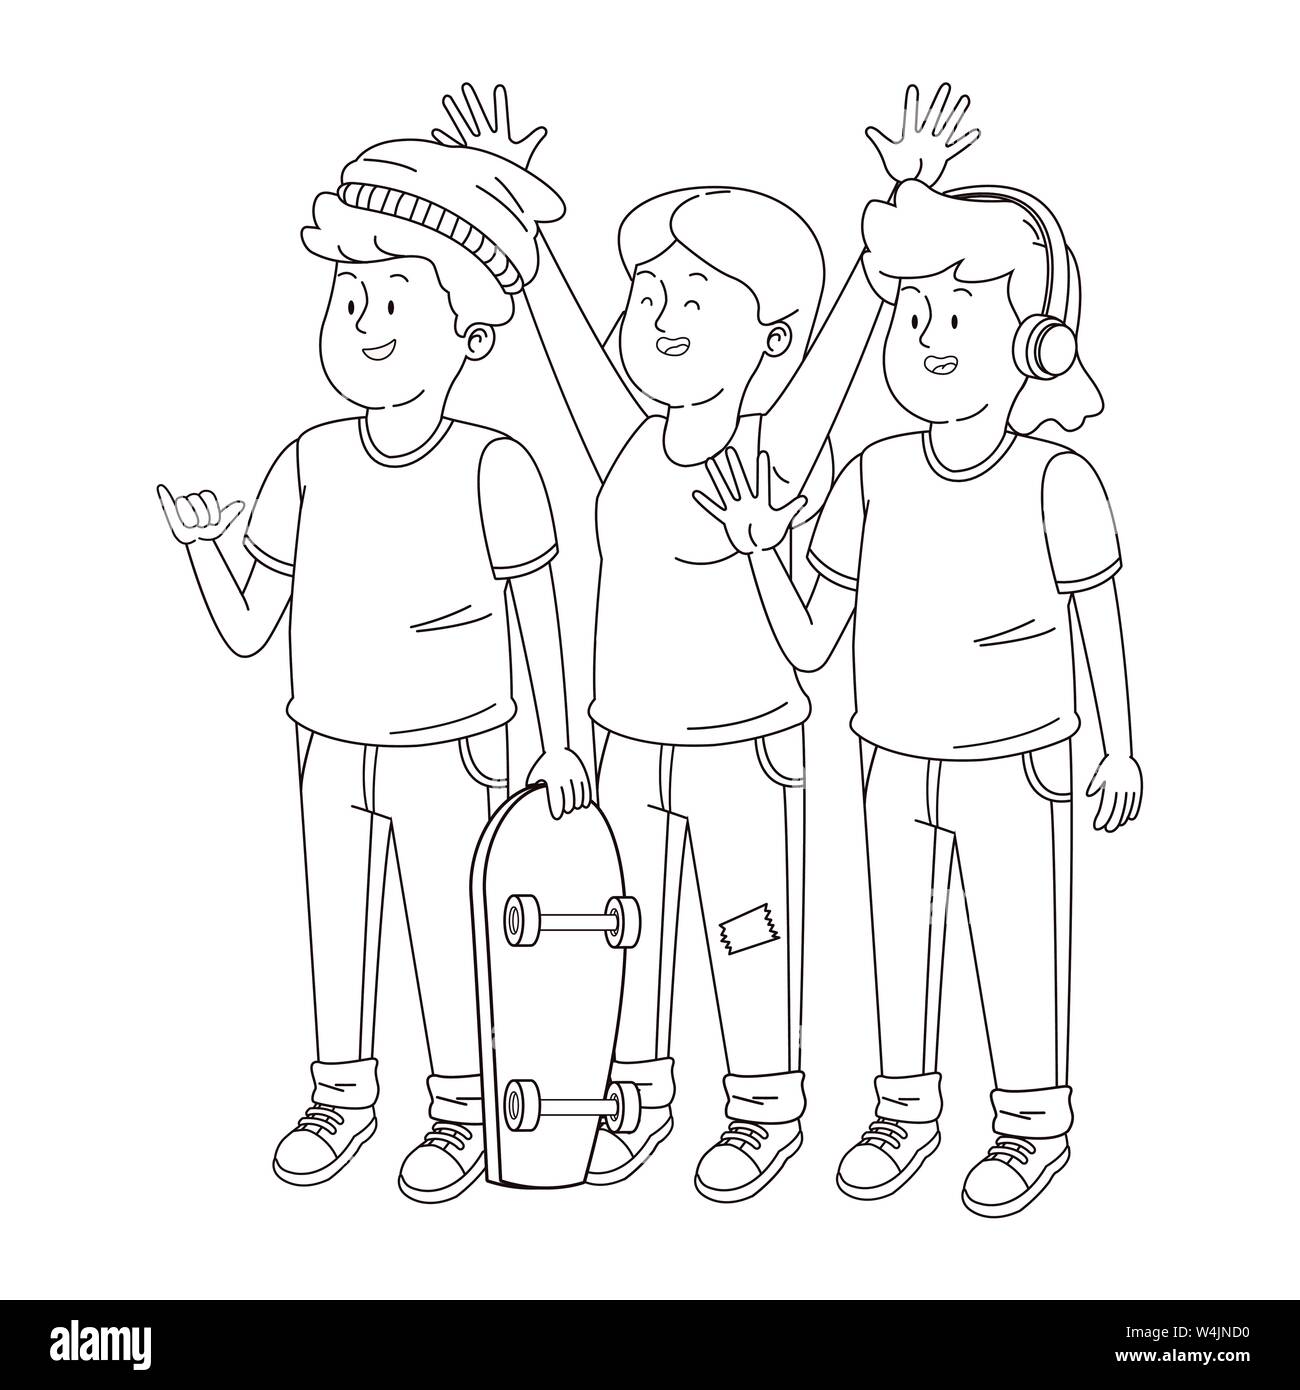 Teenagers friends smiling and greeting in black and white Stock Vector